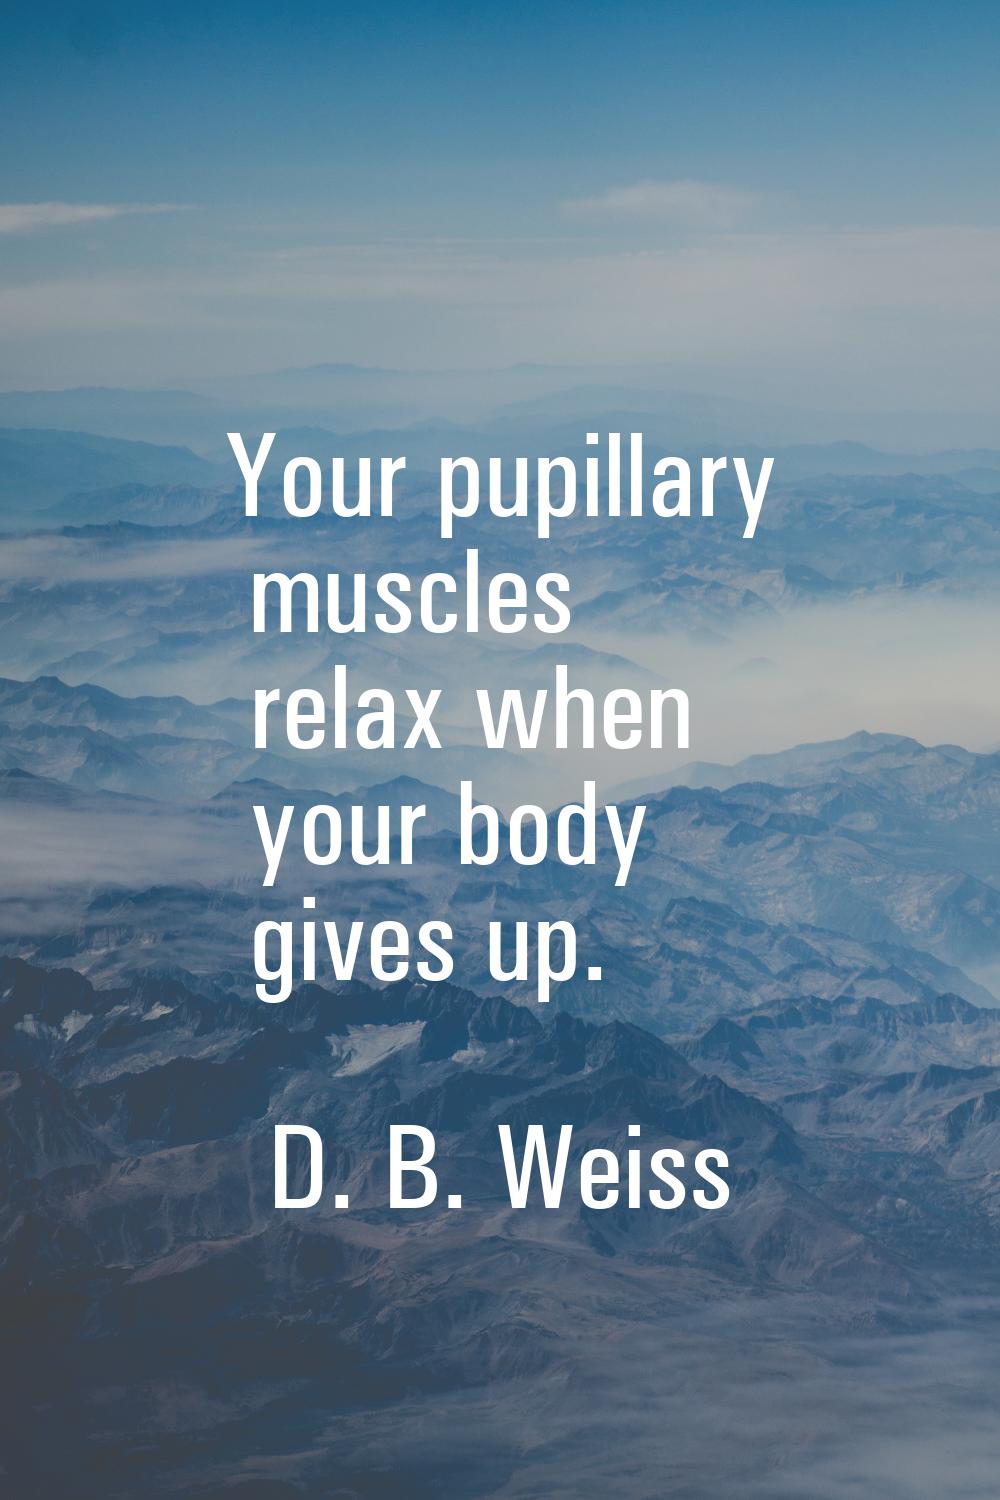 Your pupillary muscles relax when your body gives up.